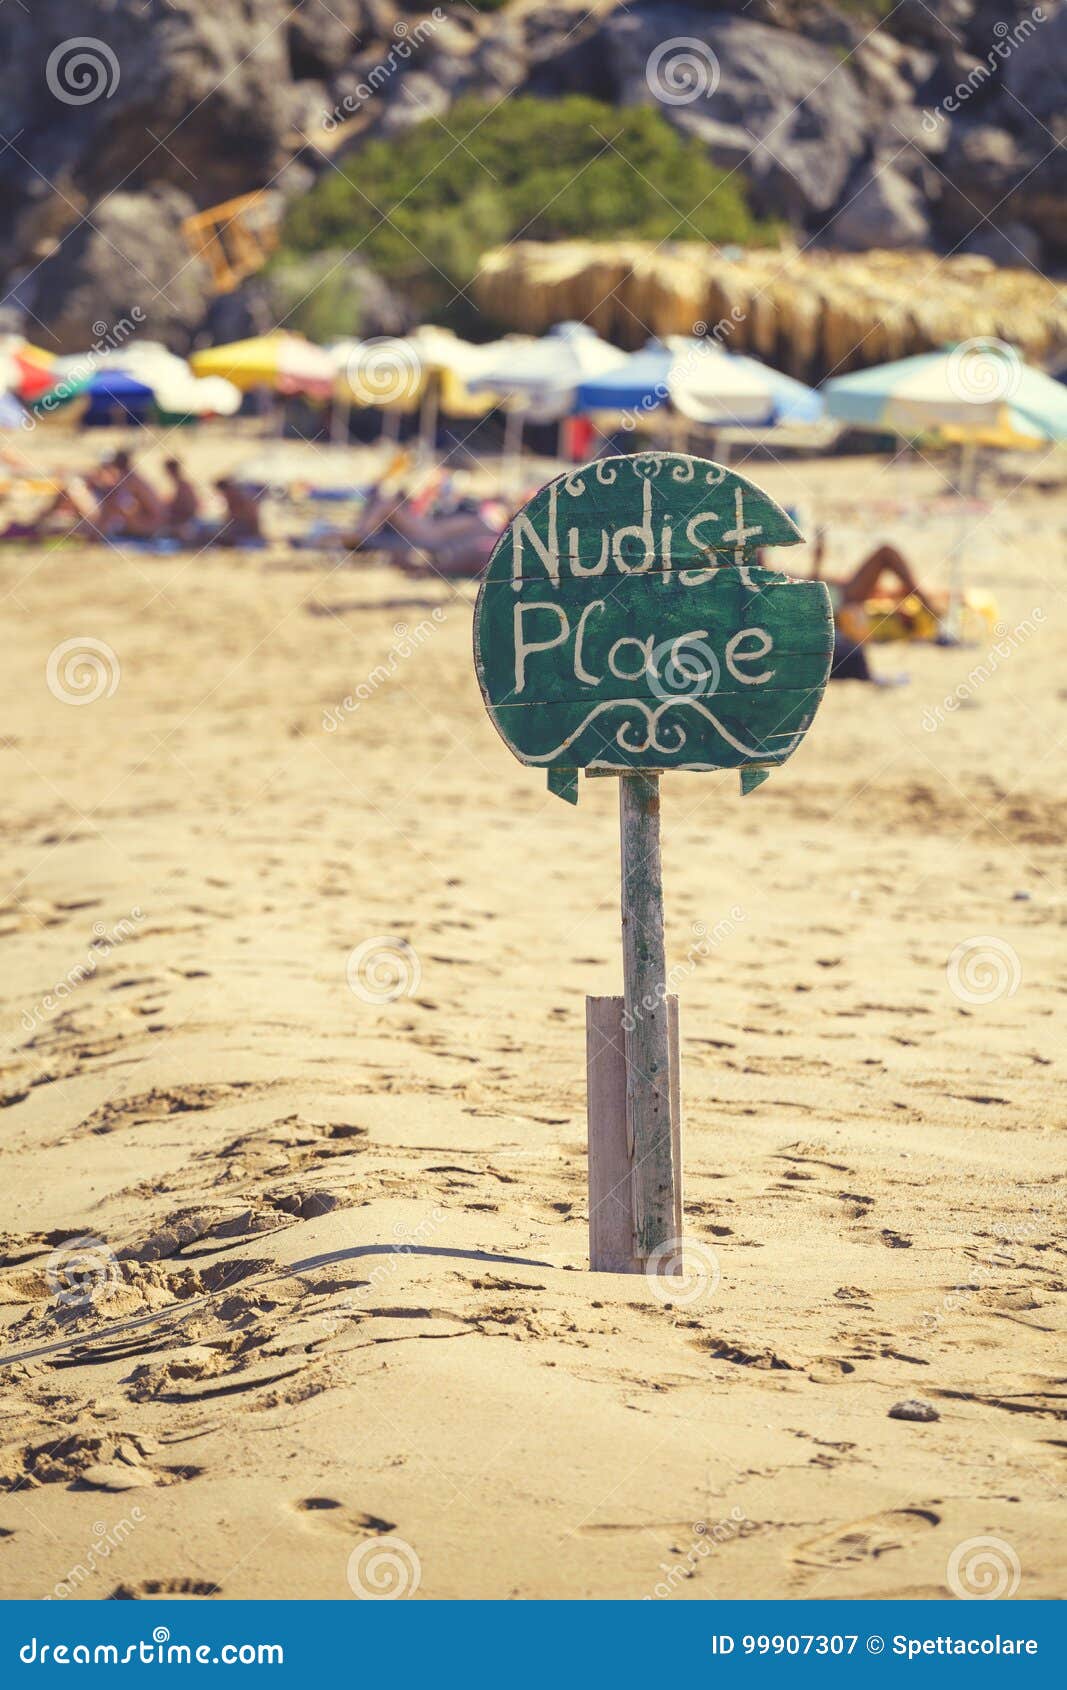 Nudist Place Wooden Sign 3 Stock Photo picture